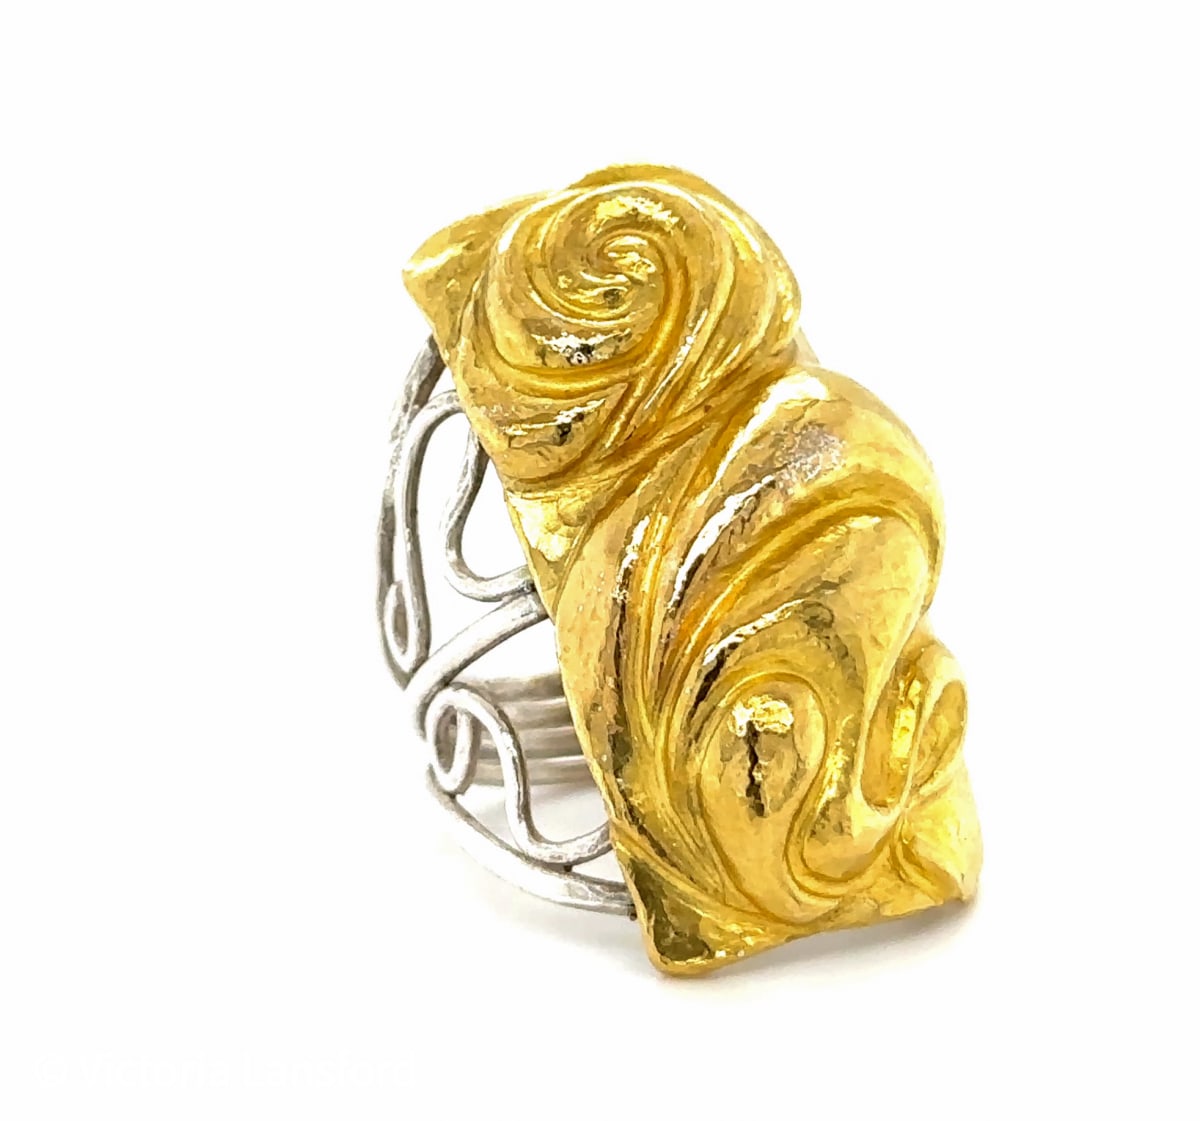 Rose Nouveau by Victoria Lansford  Image: Swirling petal forms wrap the finger to conjure the depth of a rose and the feel of La Belle Époque. This Eastern repoussé and scrollworked ring is free-hand forged from 18 karat gold sheet fused to a sterling silver backing, providing the warm color of gold with the lightness and stability of sterling in the lacy shank and beneath the relief work.